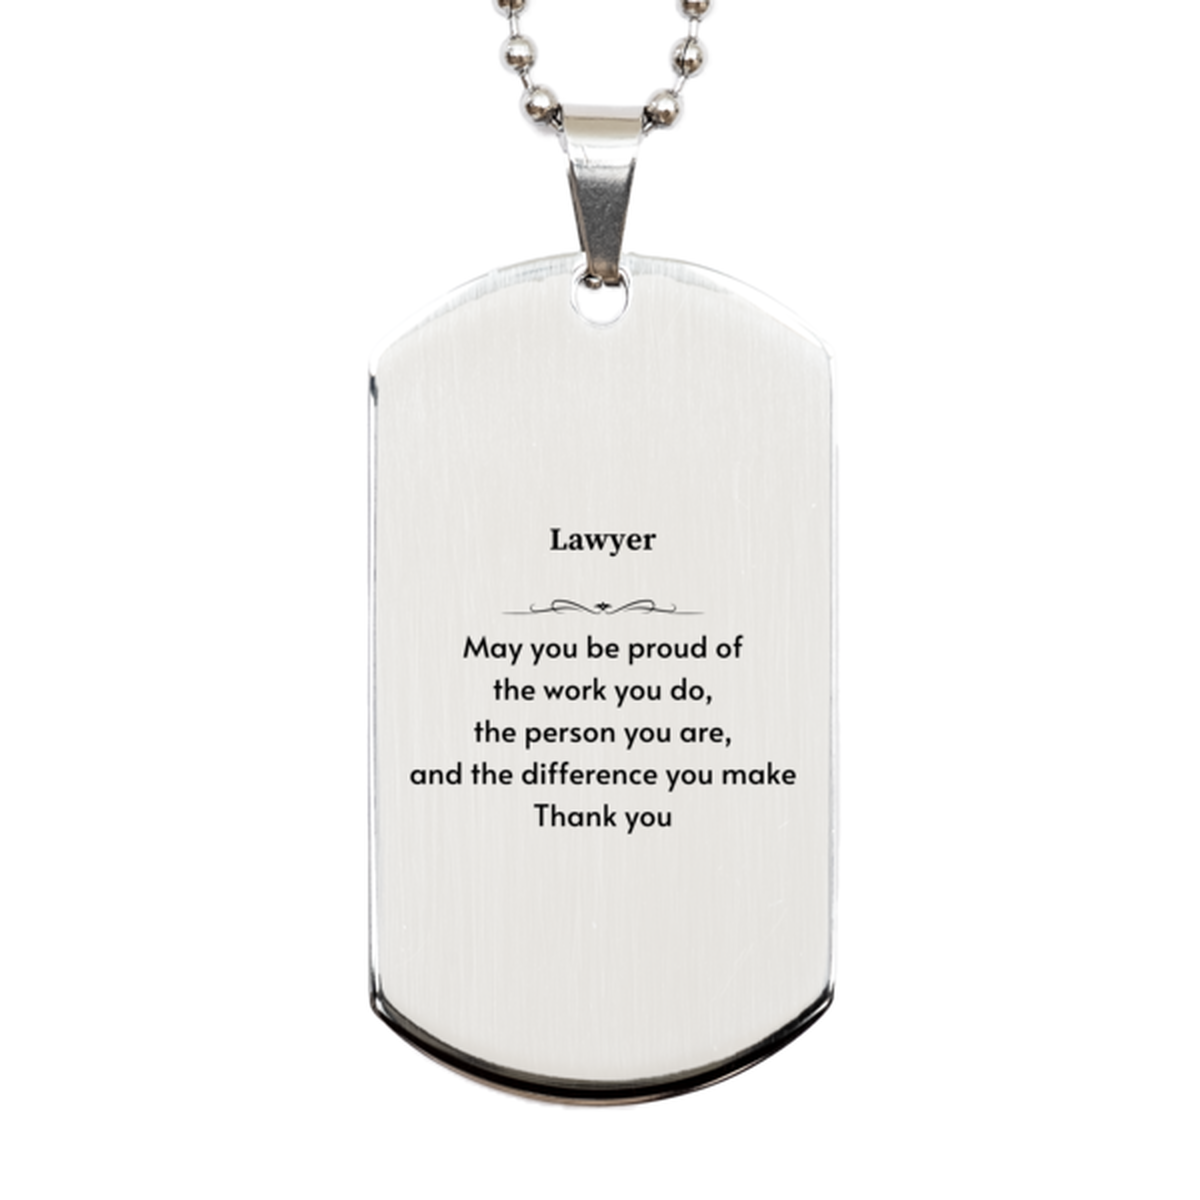 Heartwarming Silver Dog Tag Retirement Coworkers Gifts for Lawyer, Lawyer May You be proud of the work you do, the person you are Gifts for Boss Men Women Friends